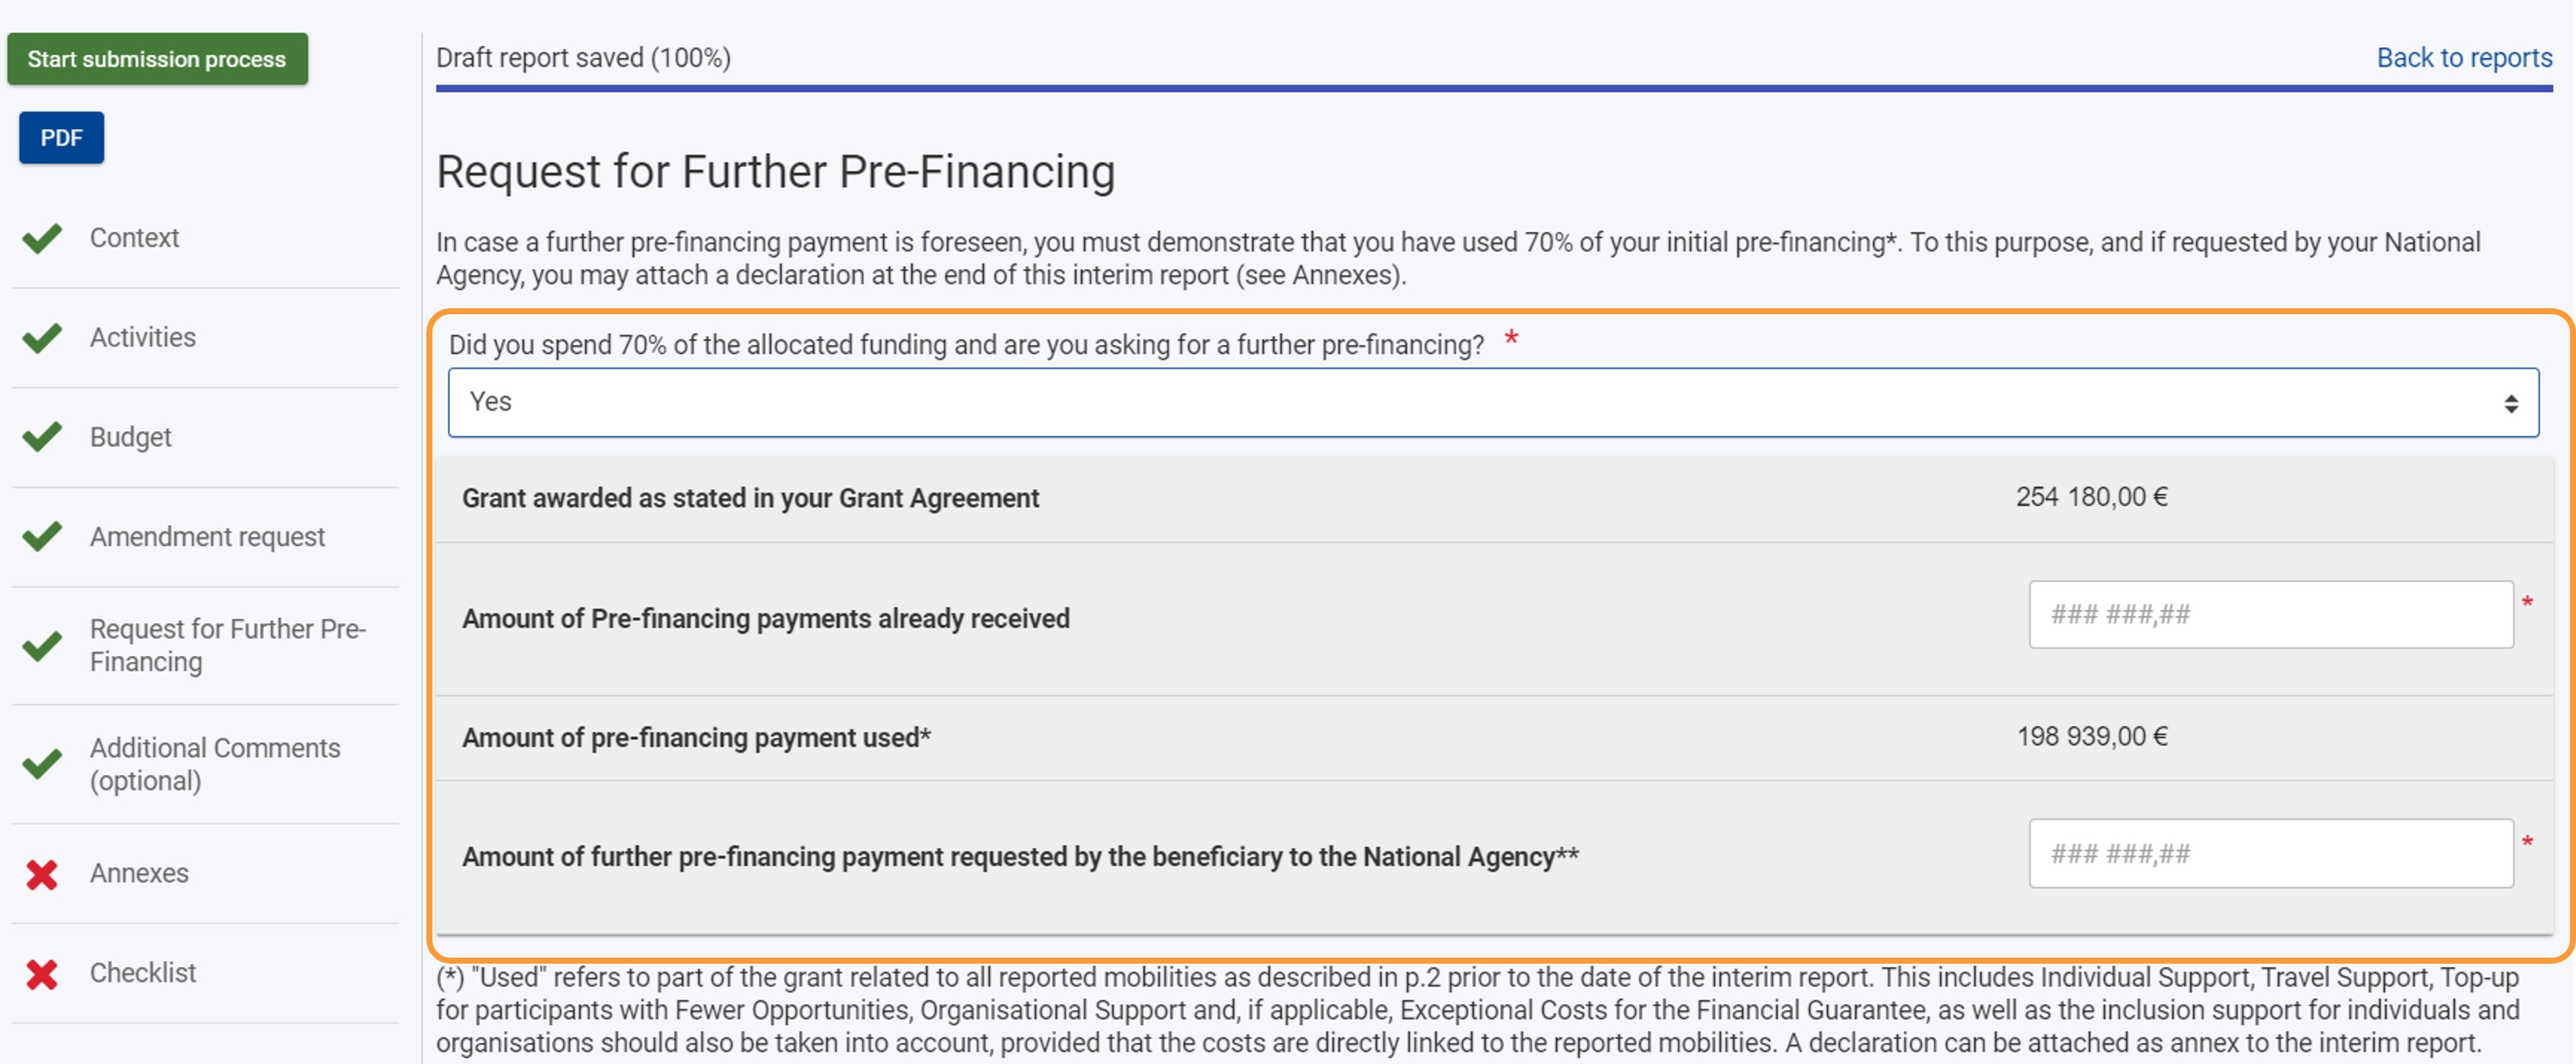 Complete the Request for Further Pre-Financing section